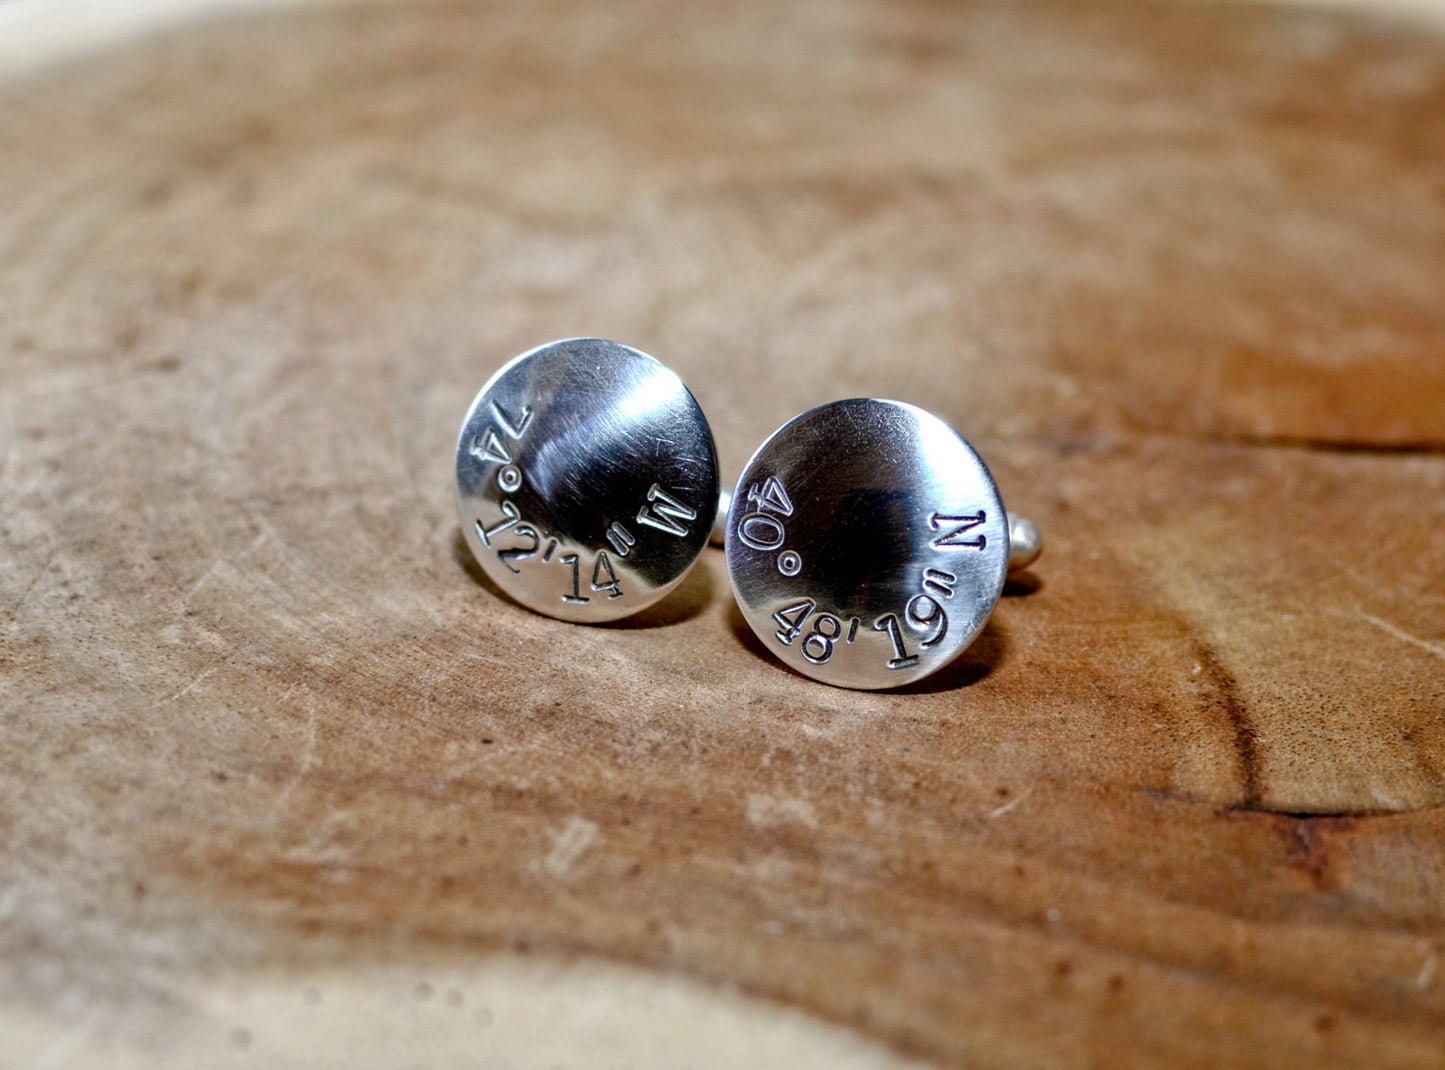 Location themed sterling silver cuff links with your latitude and longitude coordinates